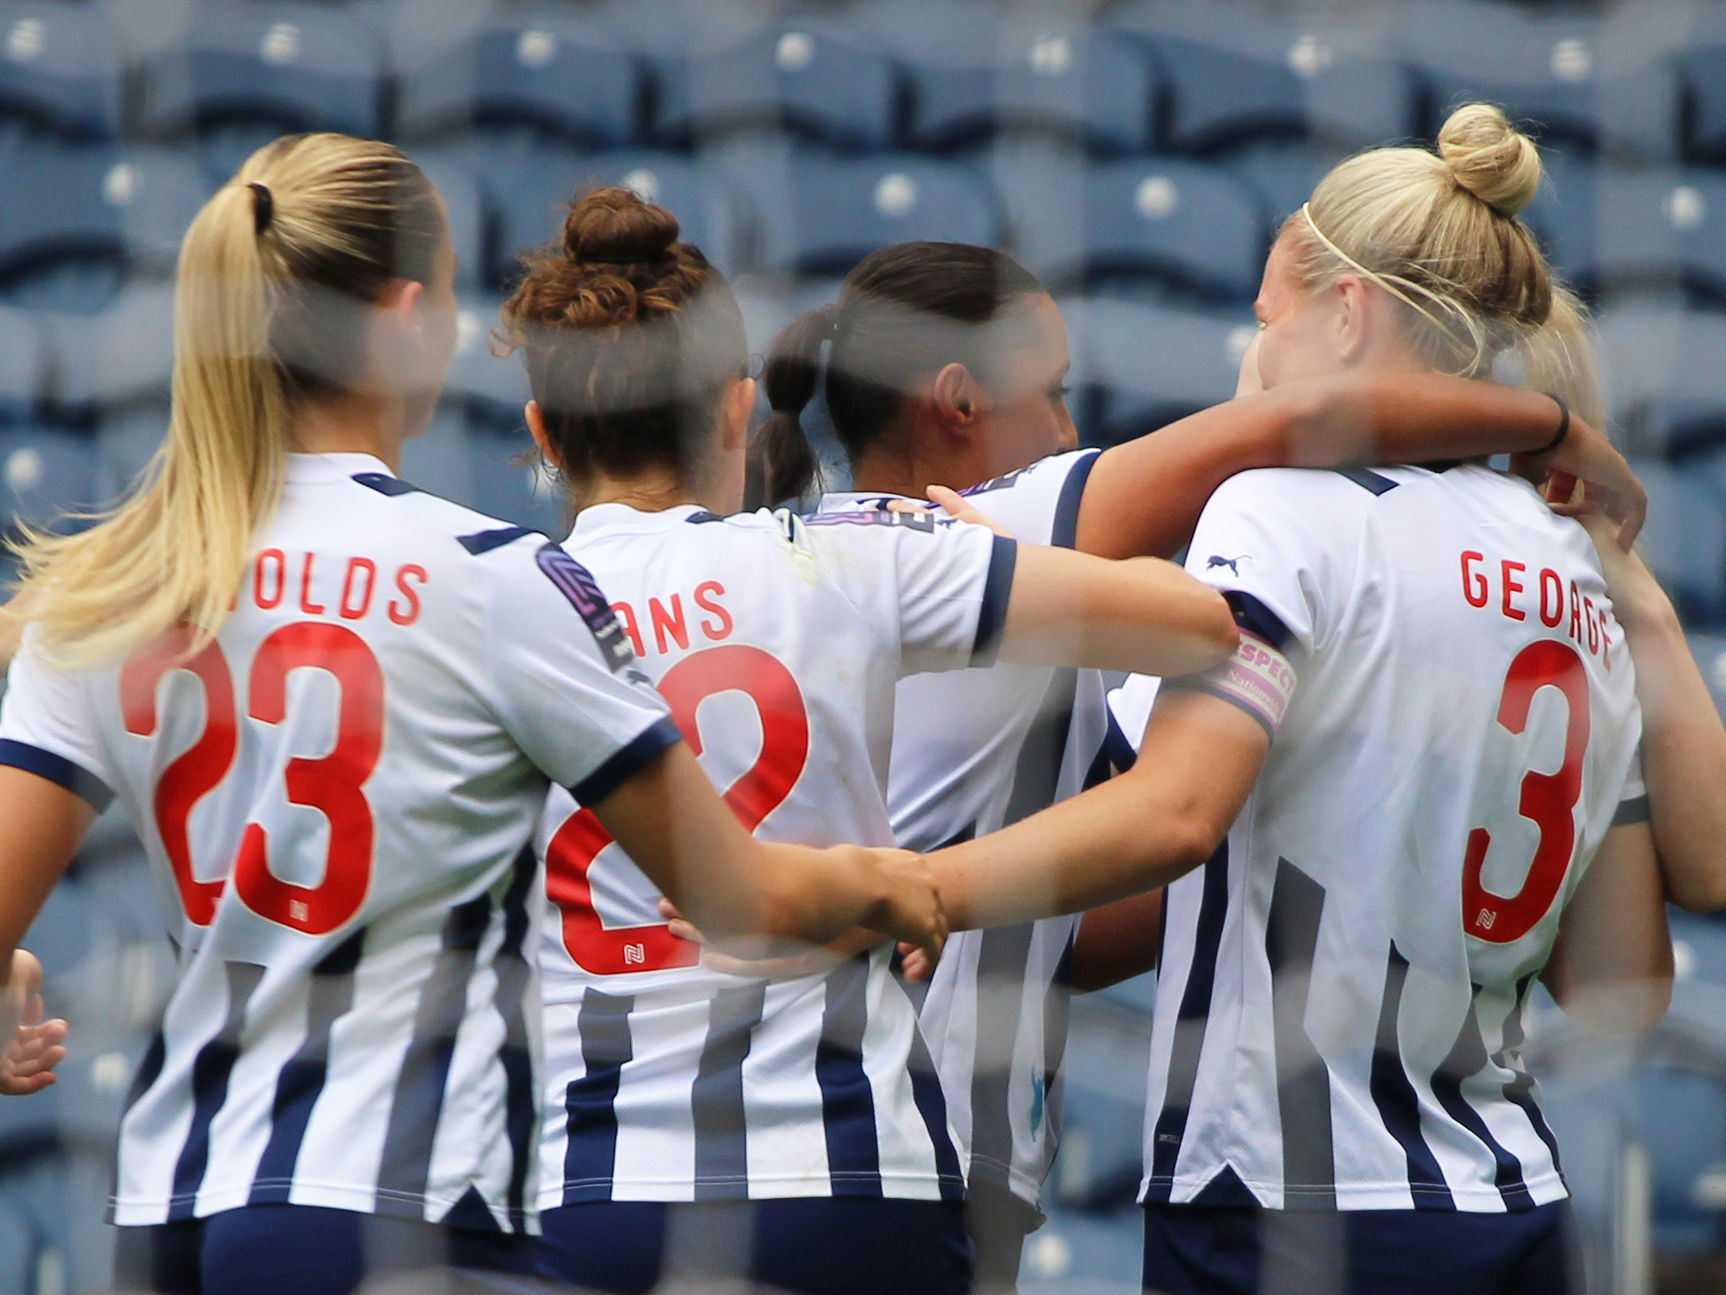 An image of Albion's Women celebrating a goal at The Hawthorns